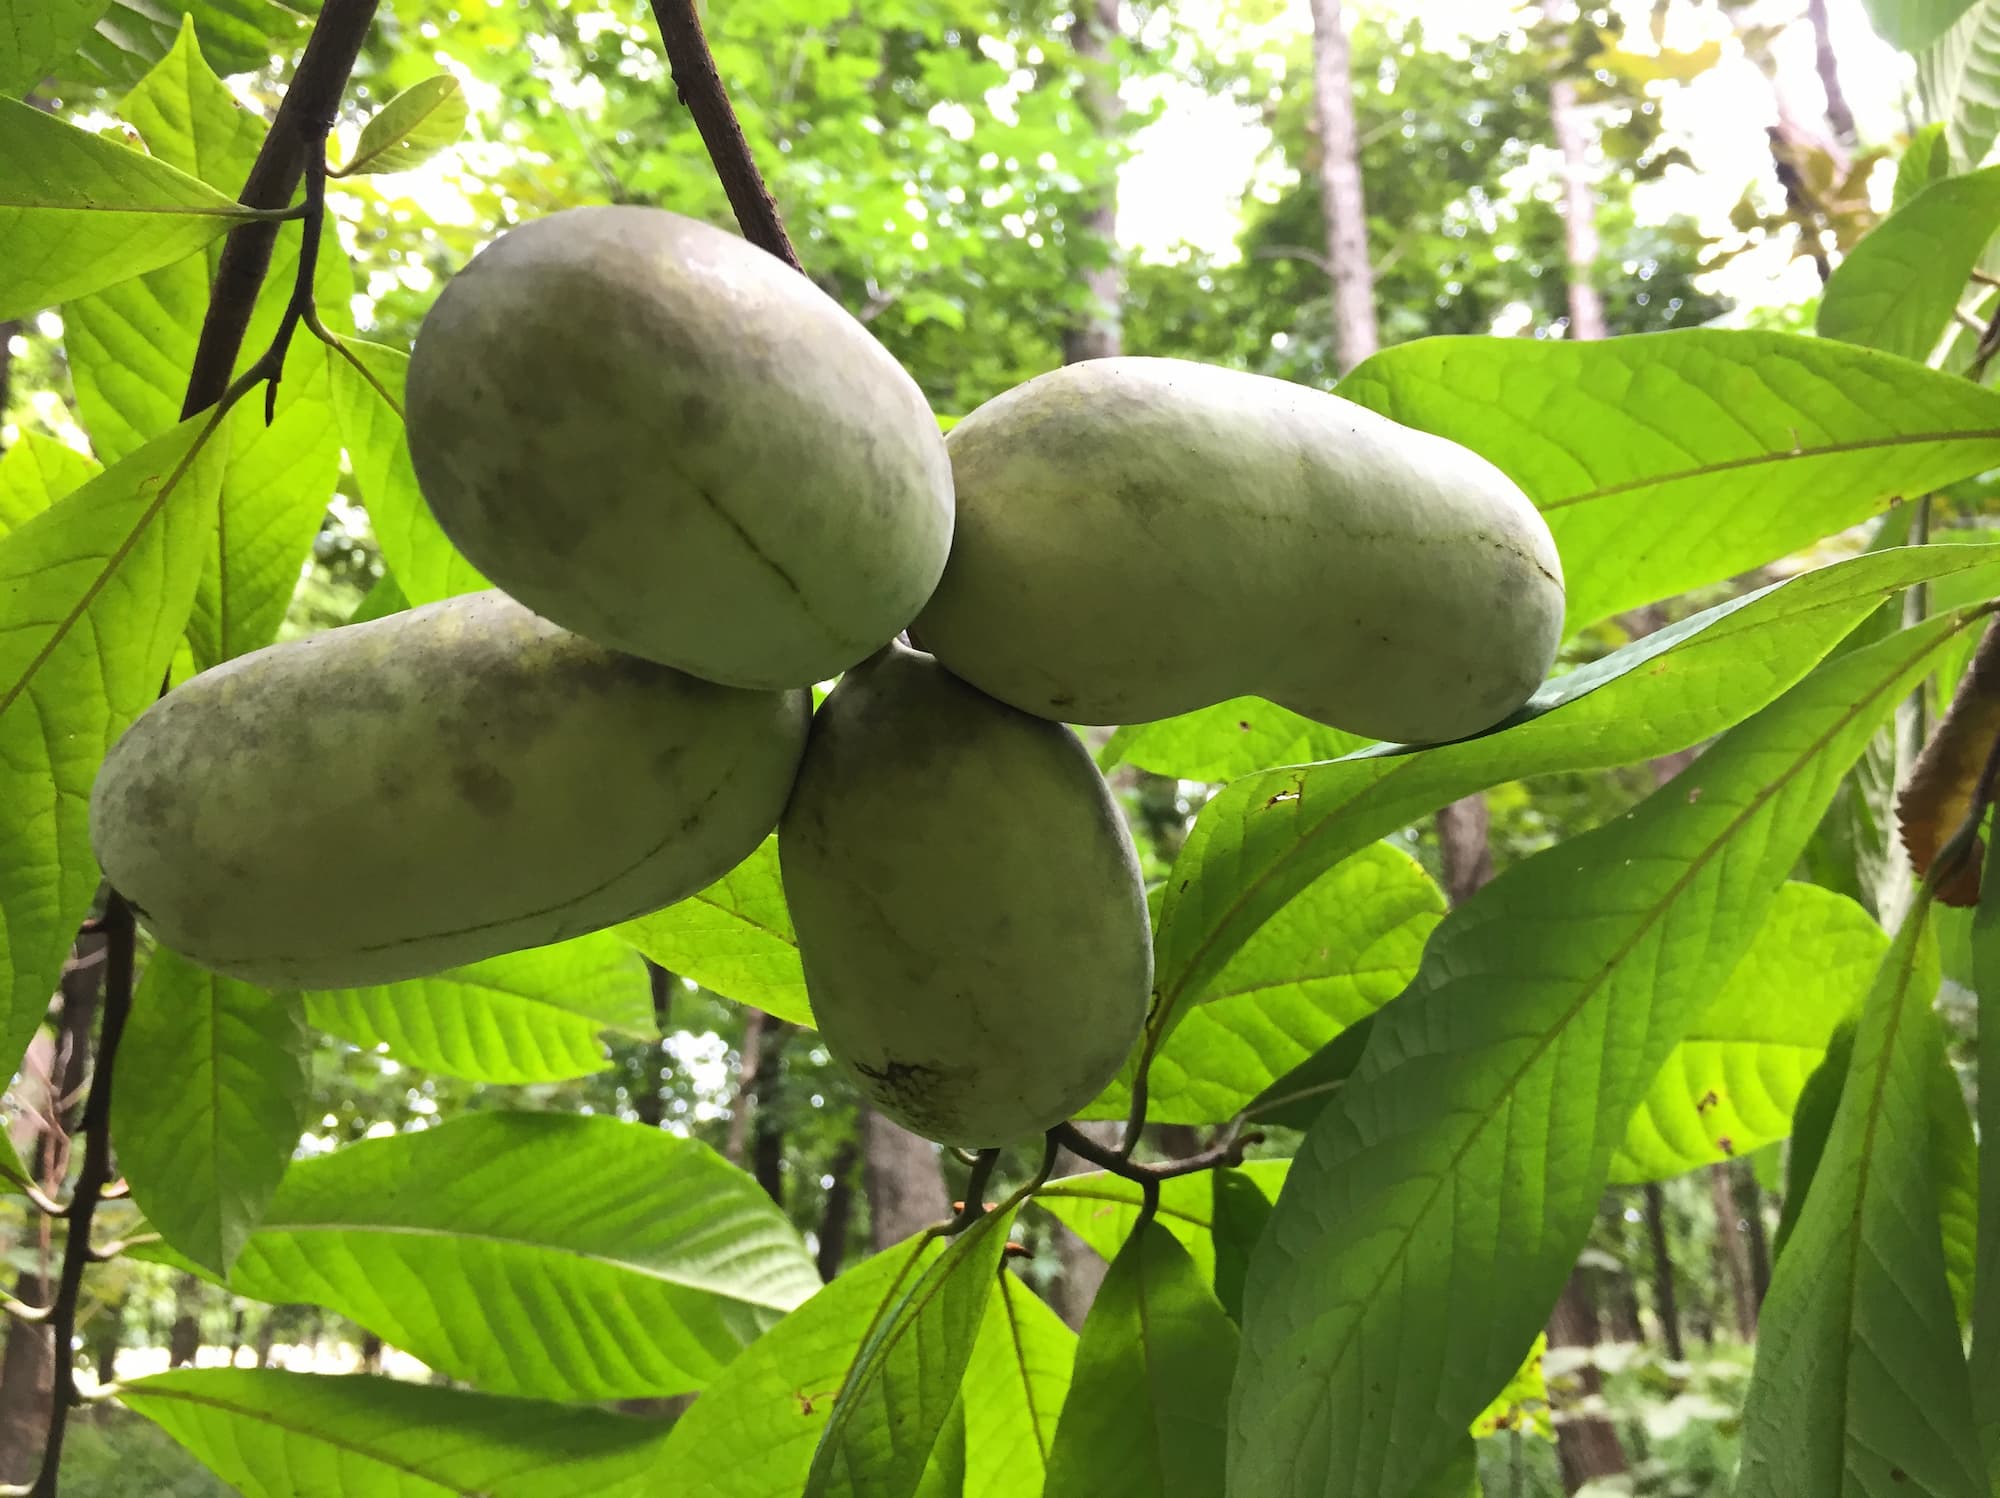 Foraging for wild fruits like pawpaws helps us to become a part of nature, rather than apart from it.